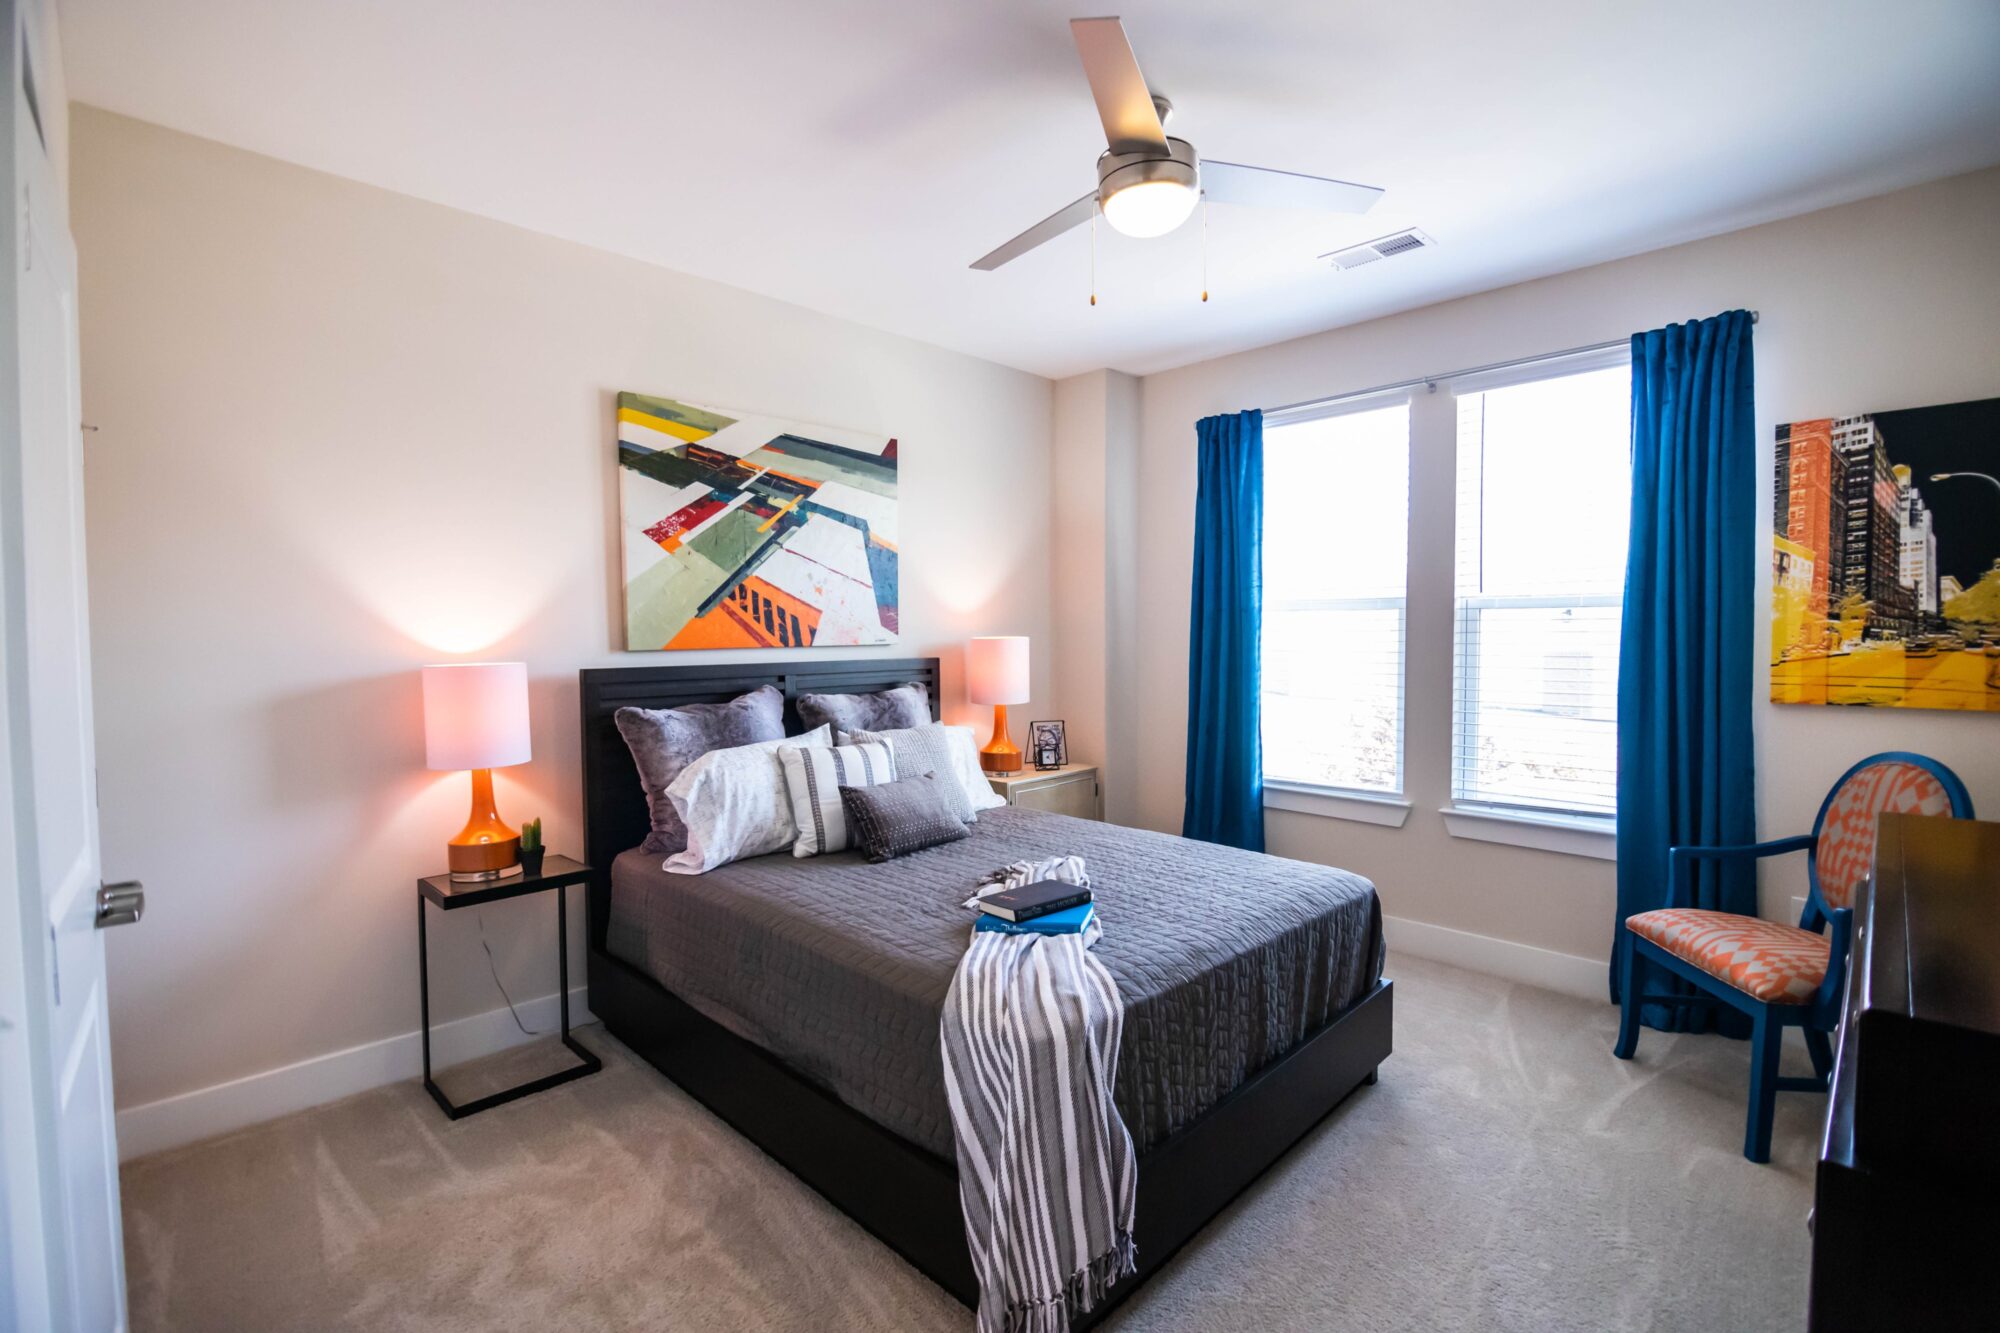 Staged bedroom with large window and ceiling fan